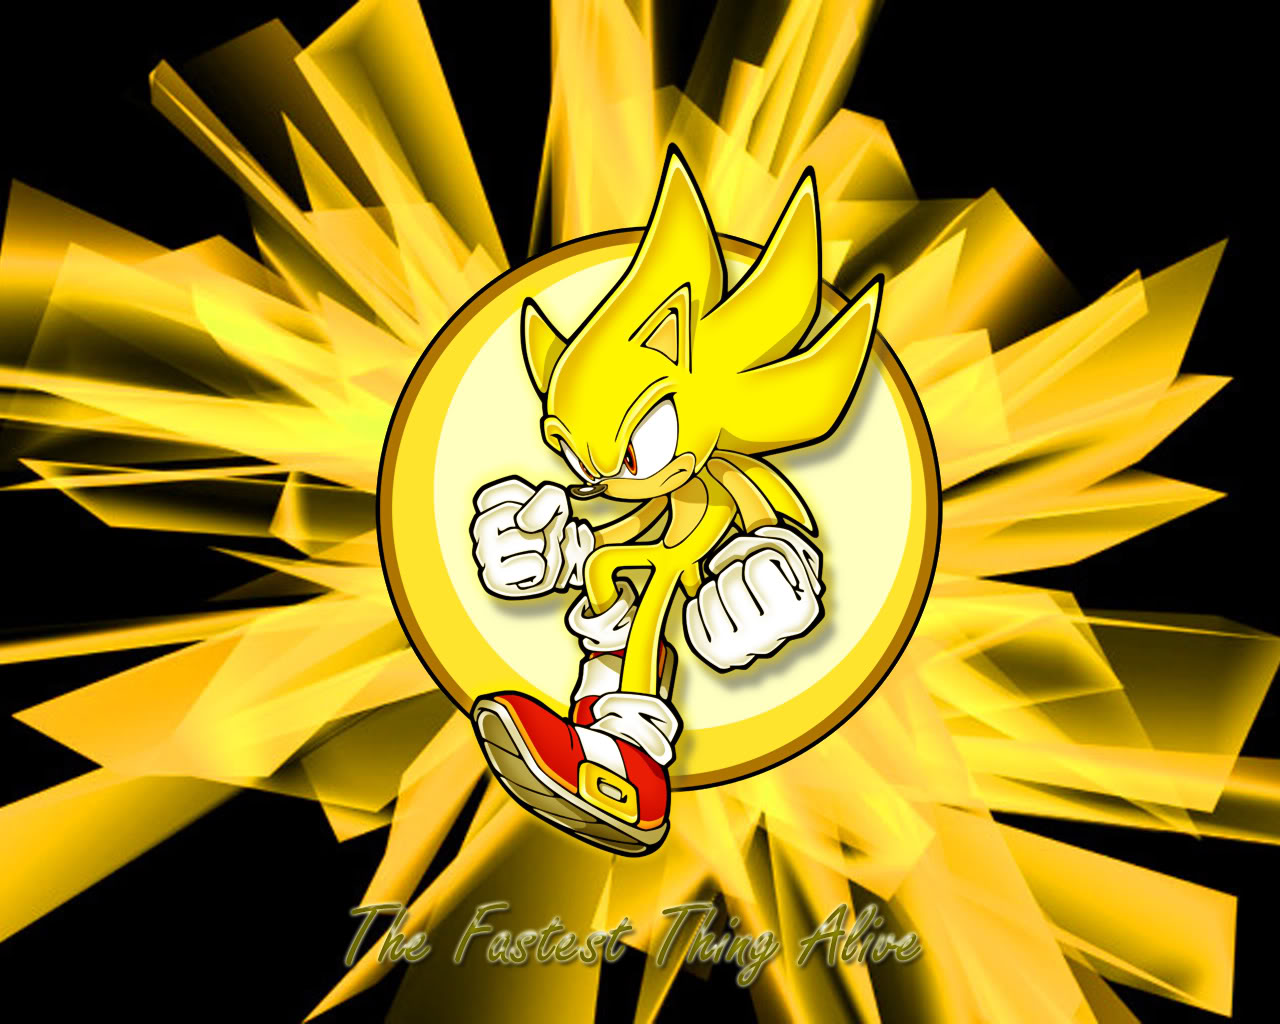 Free Download Super Sonic Hd Background Wallpapers 7507 Amazing Wallpaperz 1280x1024 For Your Desktop Mobile Tablet Explore 77 Super Sonic Wallpapers Sonic Wallpaper Sonic Hd Wallpaper Sonic The Hedgehog Hd Wallpaper